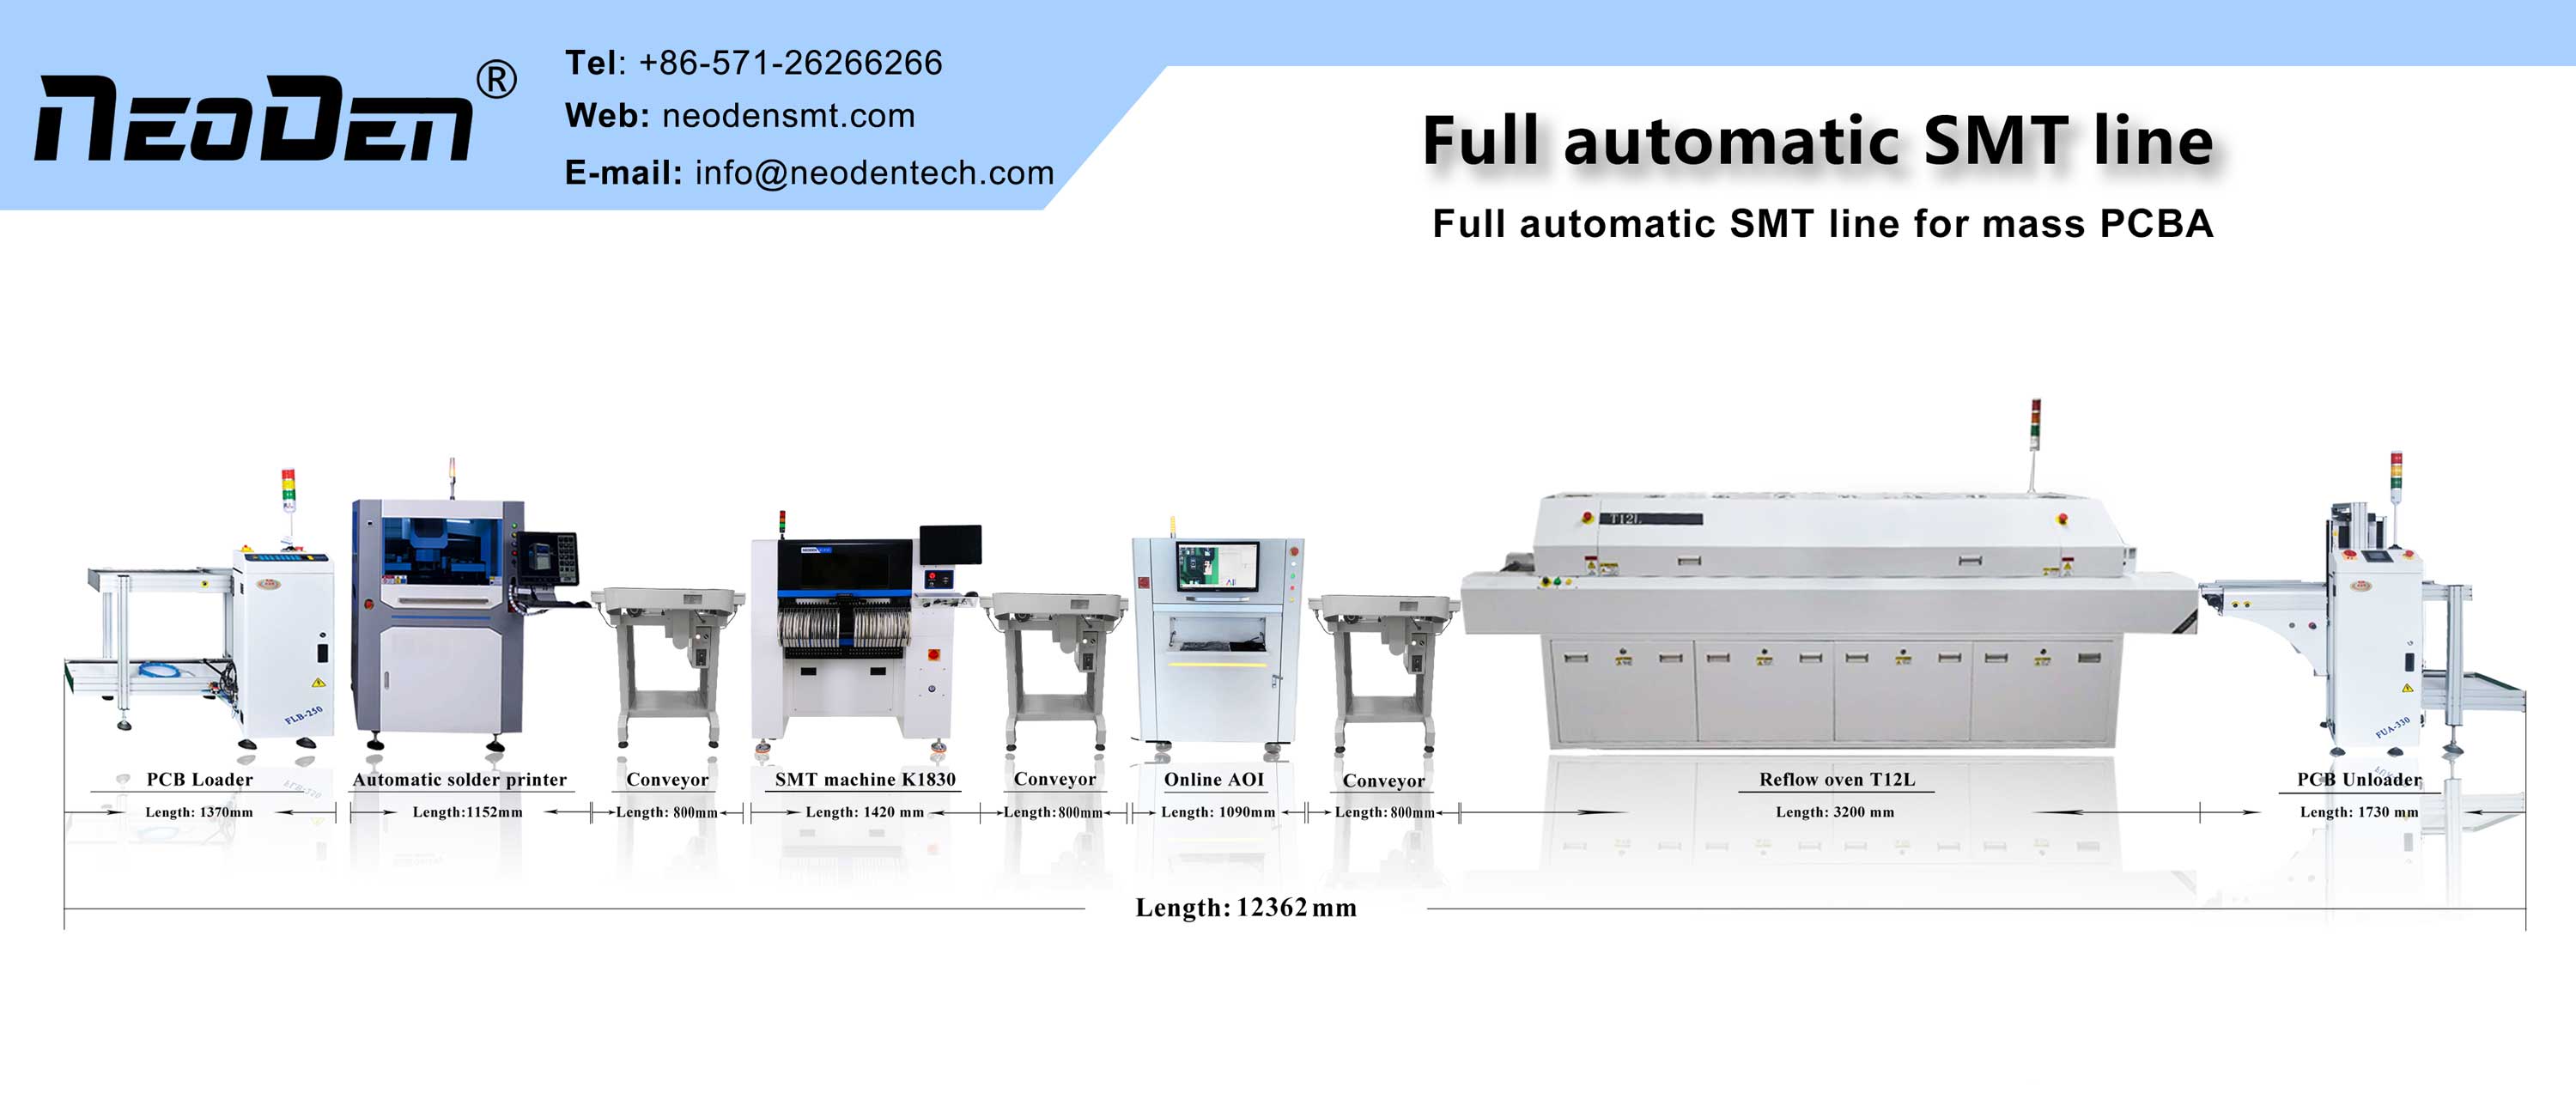 SMT pick and place machine with 8 nozzles, high speed SMT machine.